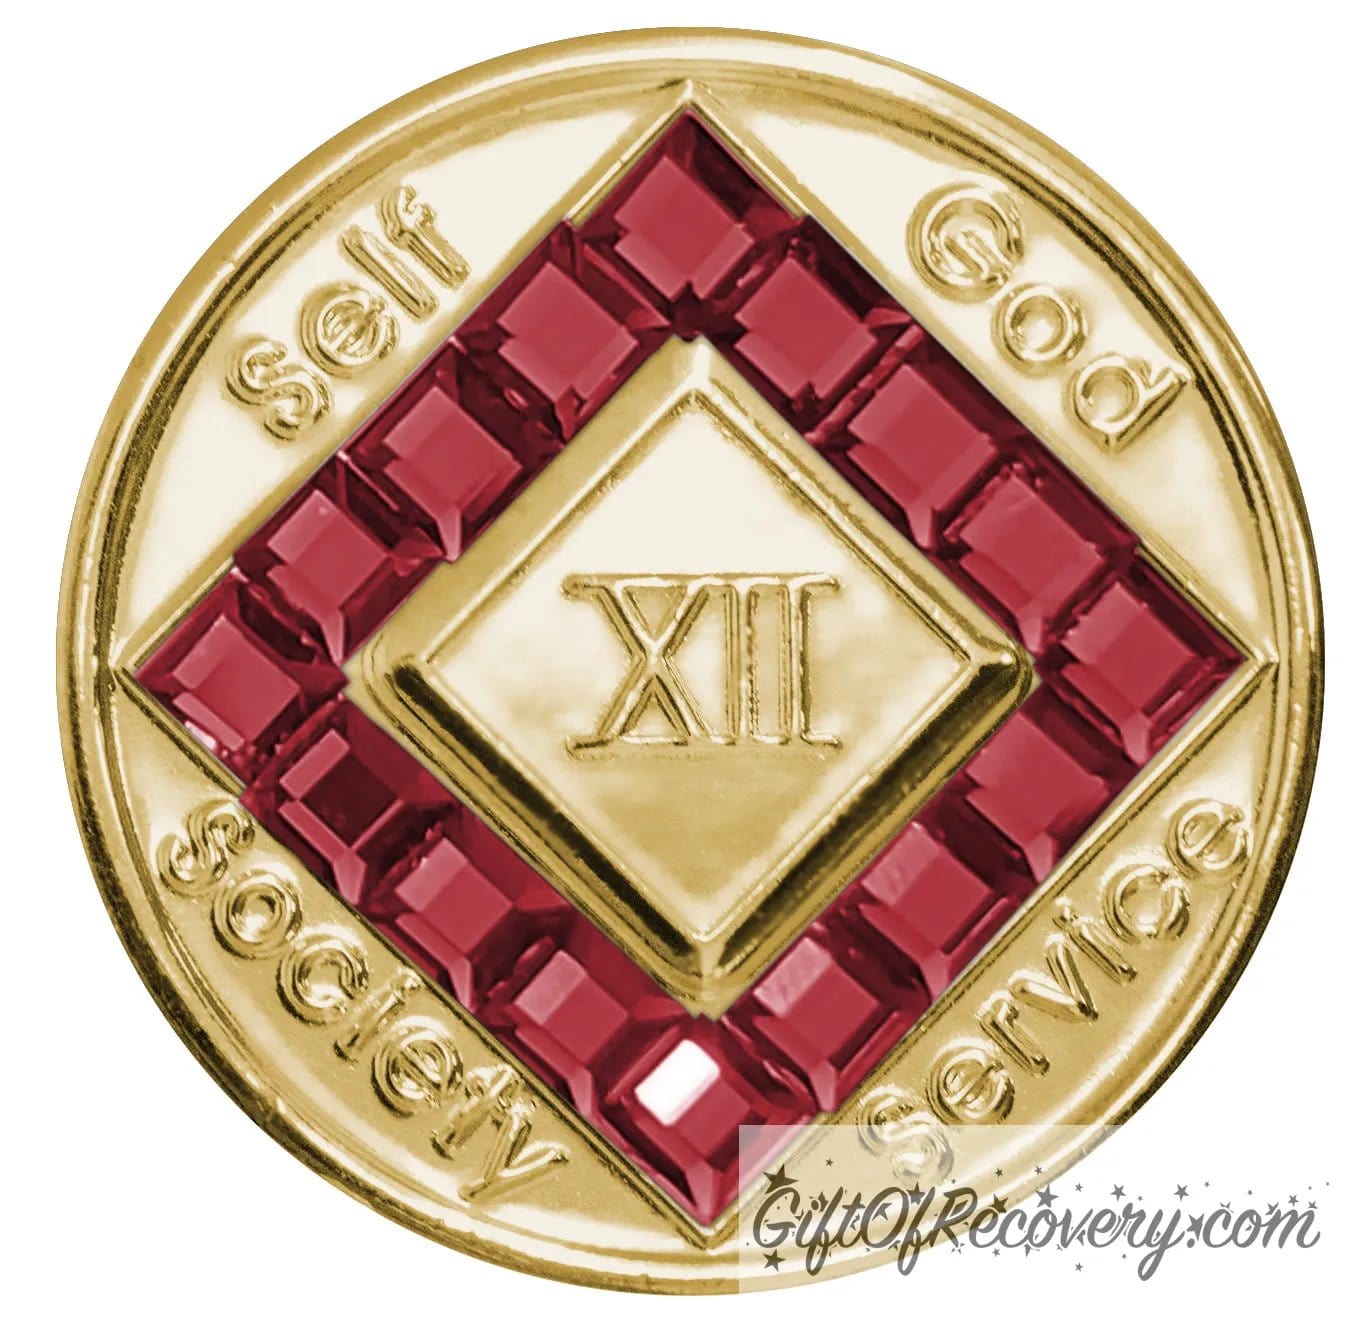 Clean Time Chip Narcotics Anonymous Gold with Diamond Shaped Crystal (Scarlet Red)